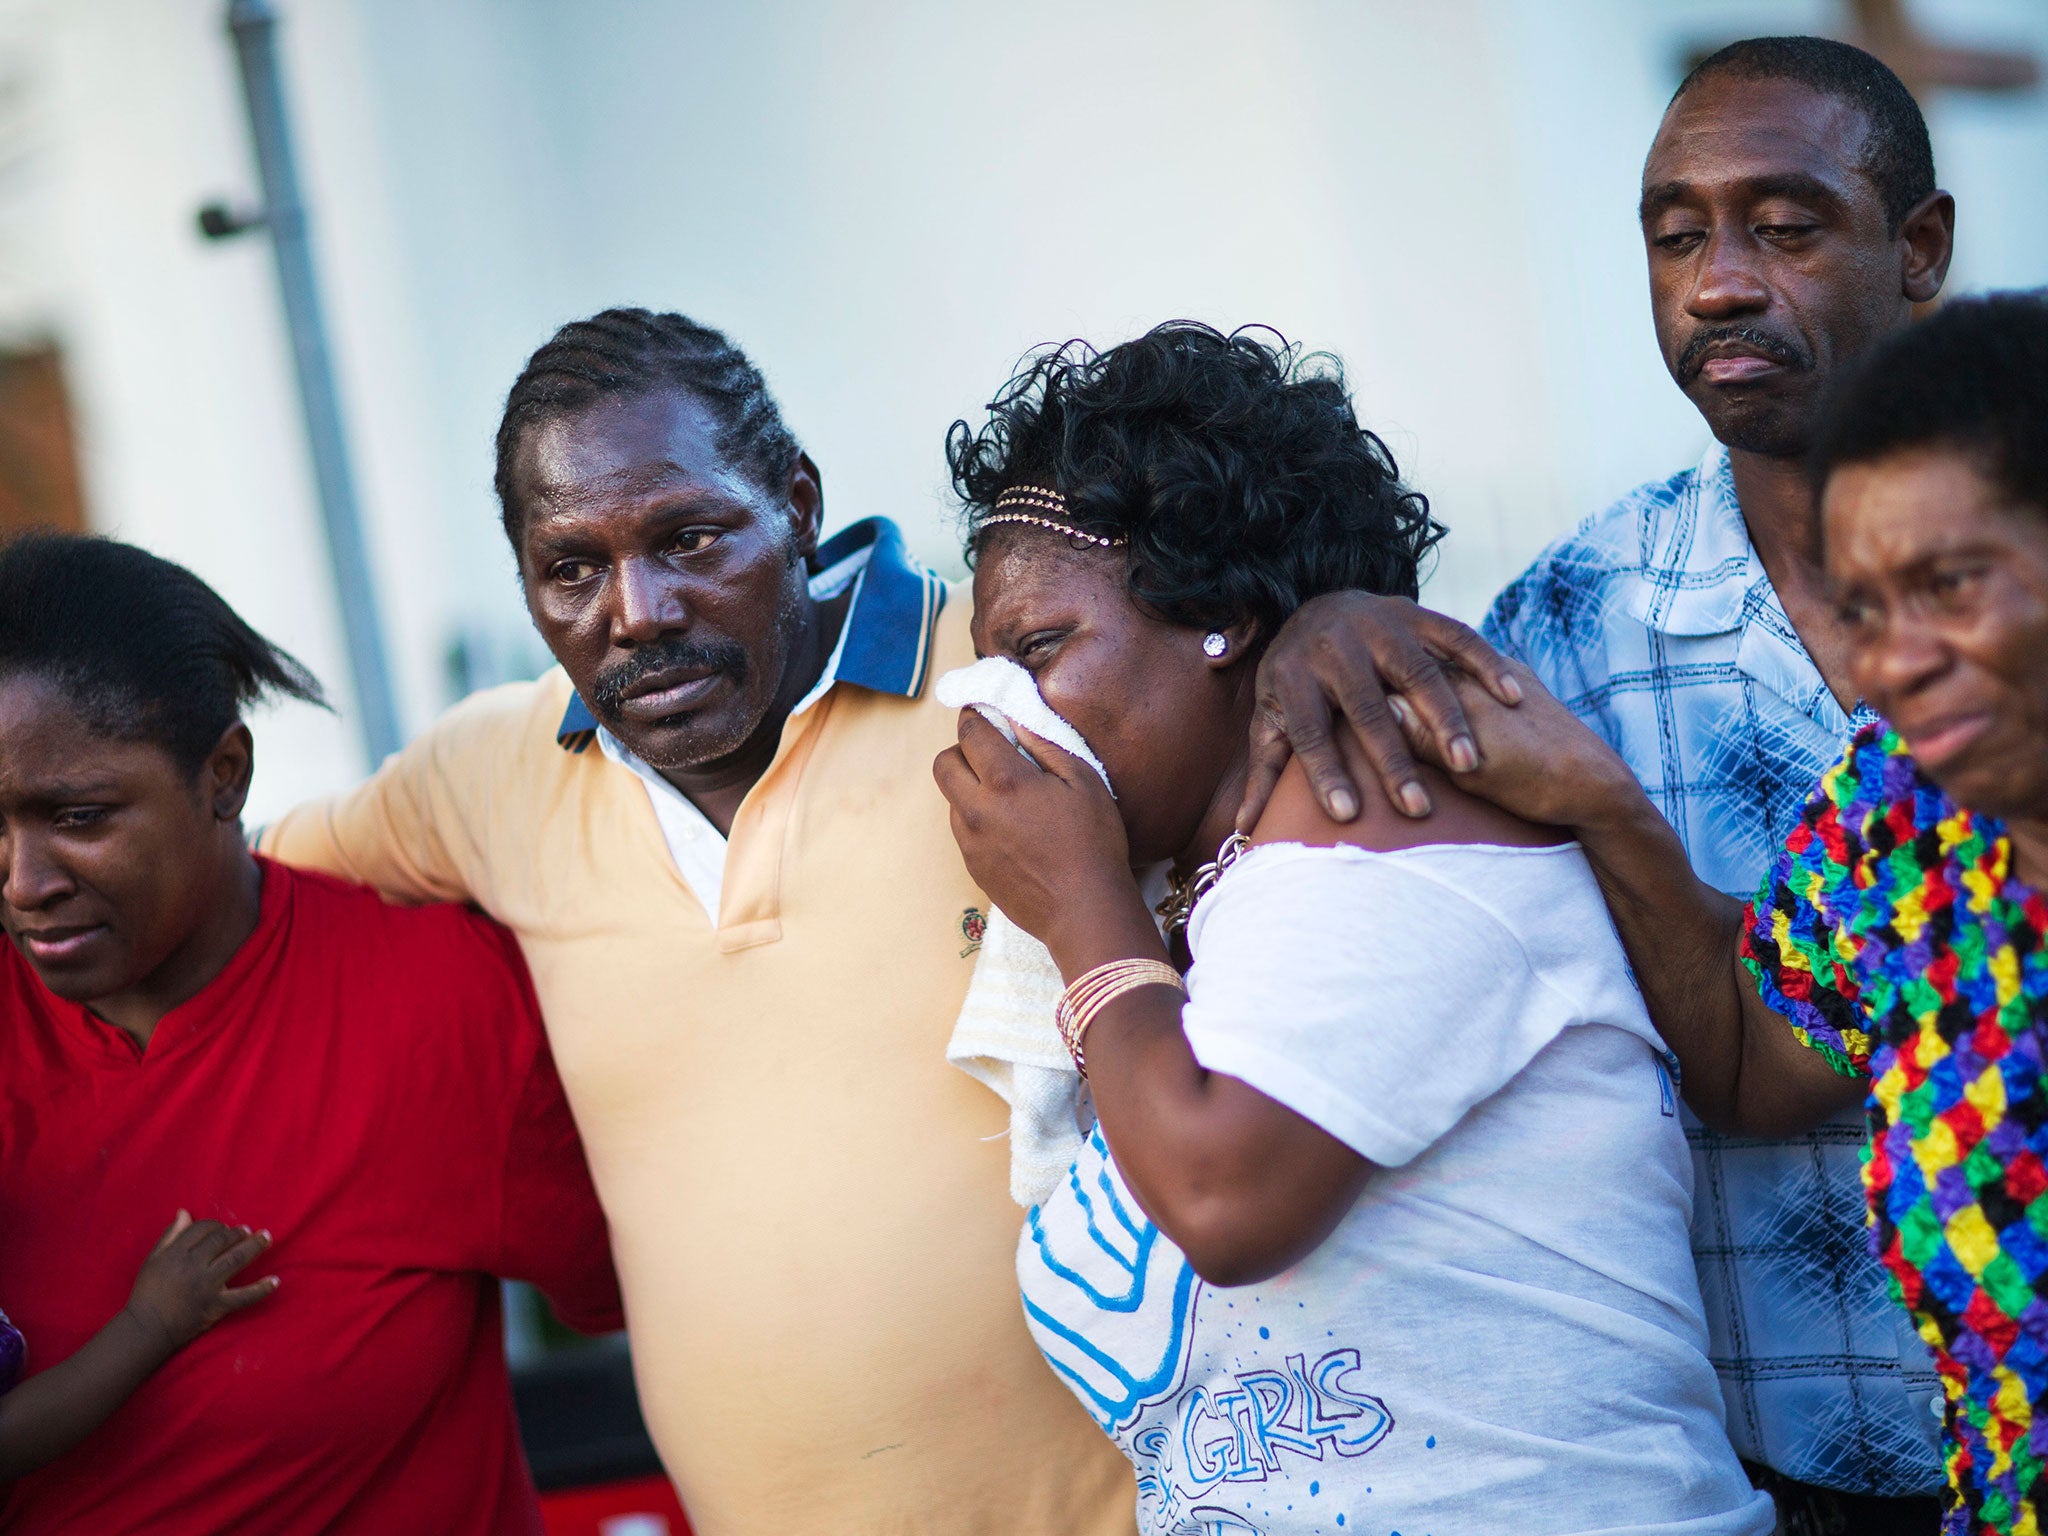 Gary and Aurelia Washington, center left and right, the son and granddaughter of Ethel Lance who died in the shooting